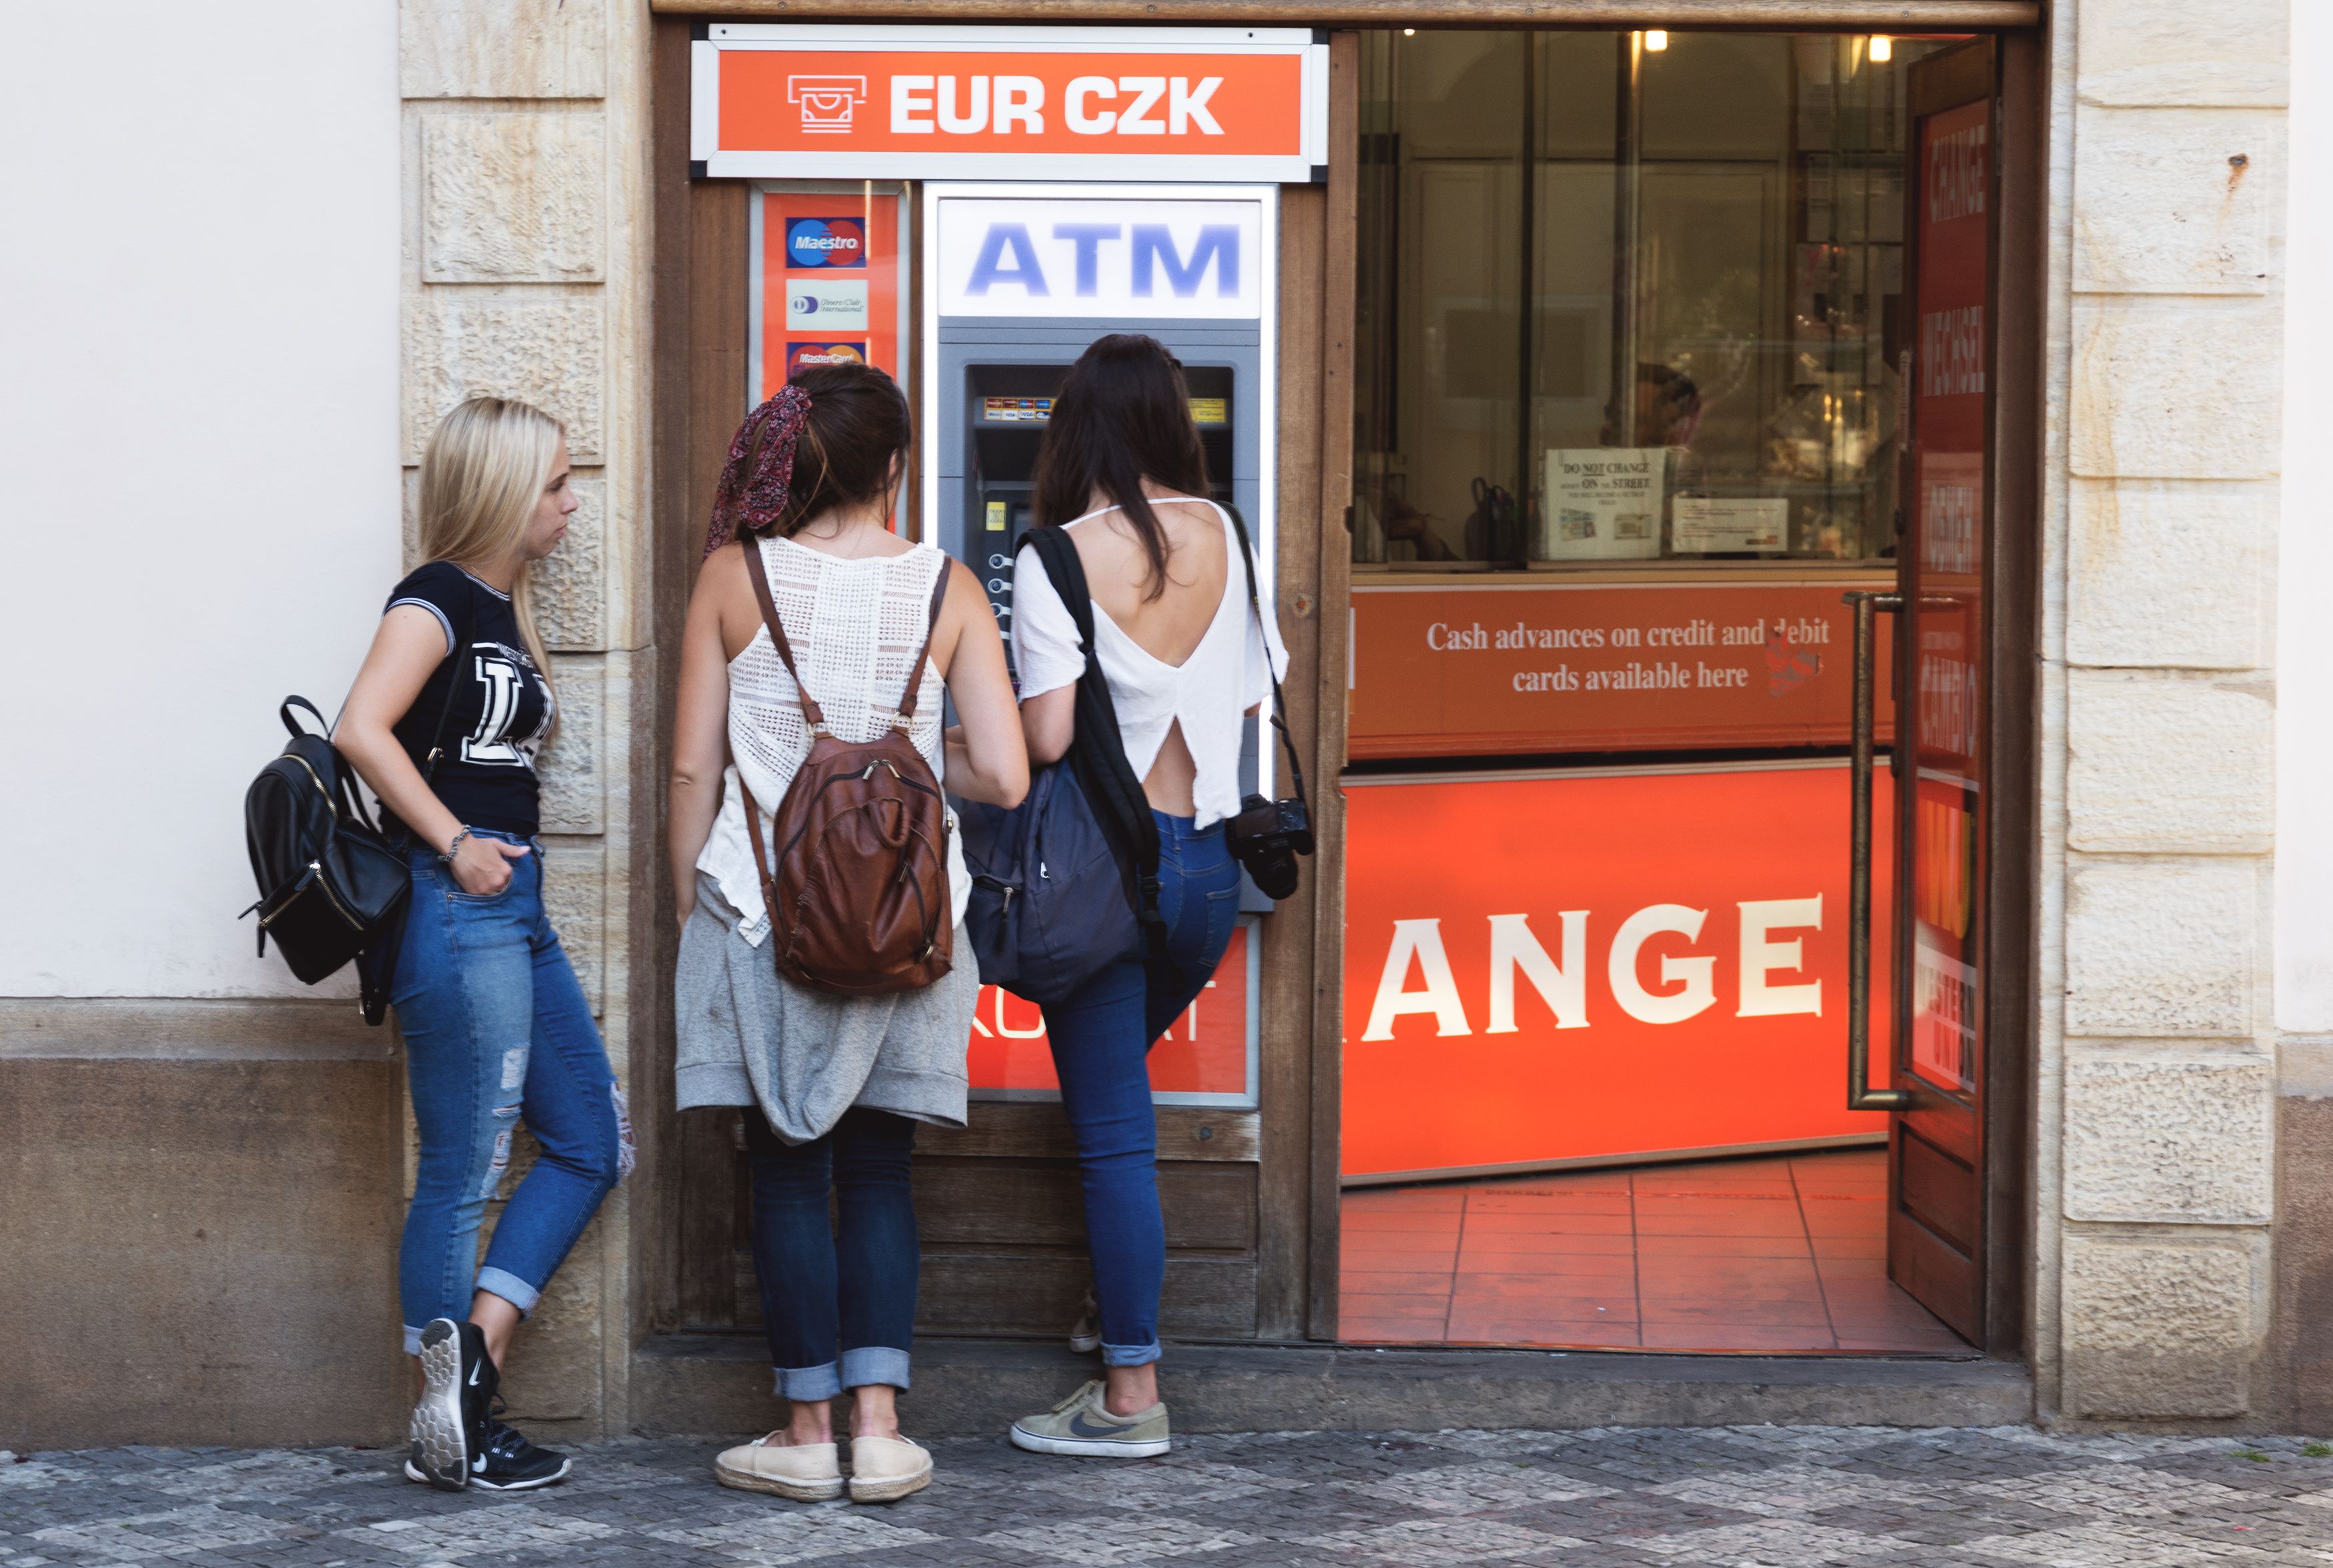 Three young women using an ATM